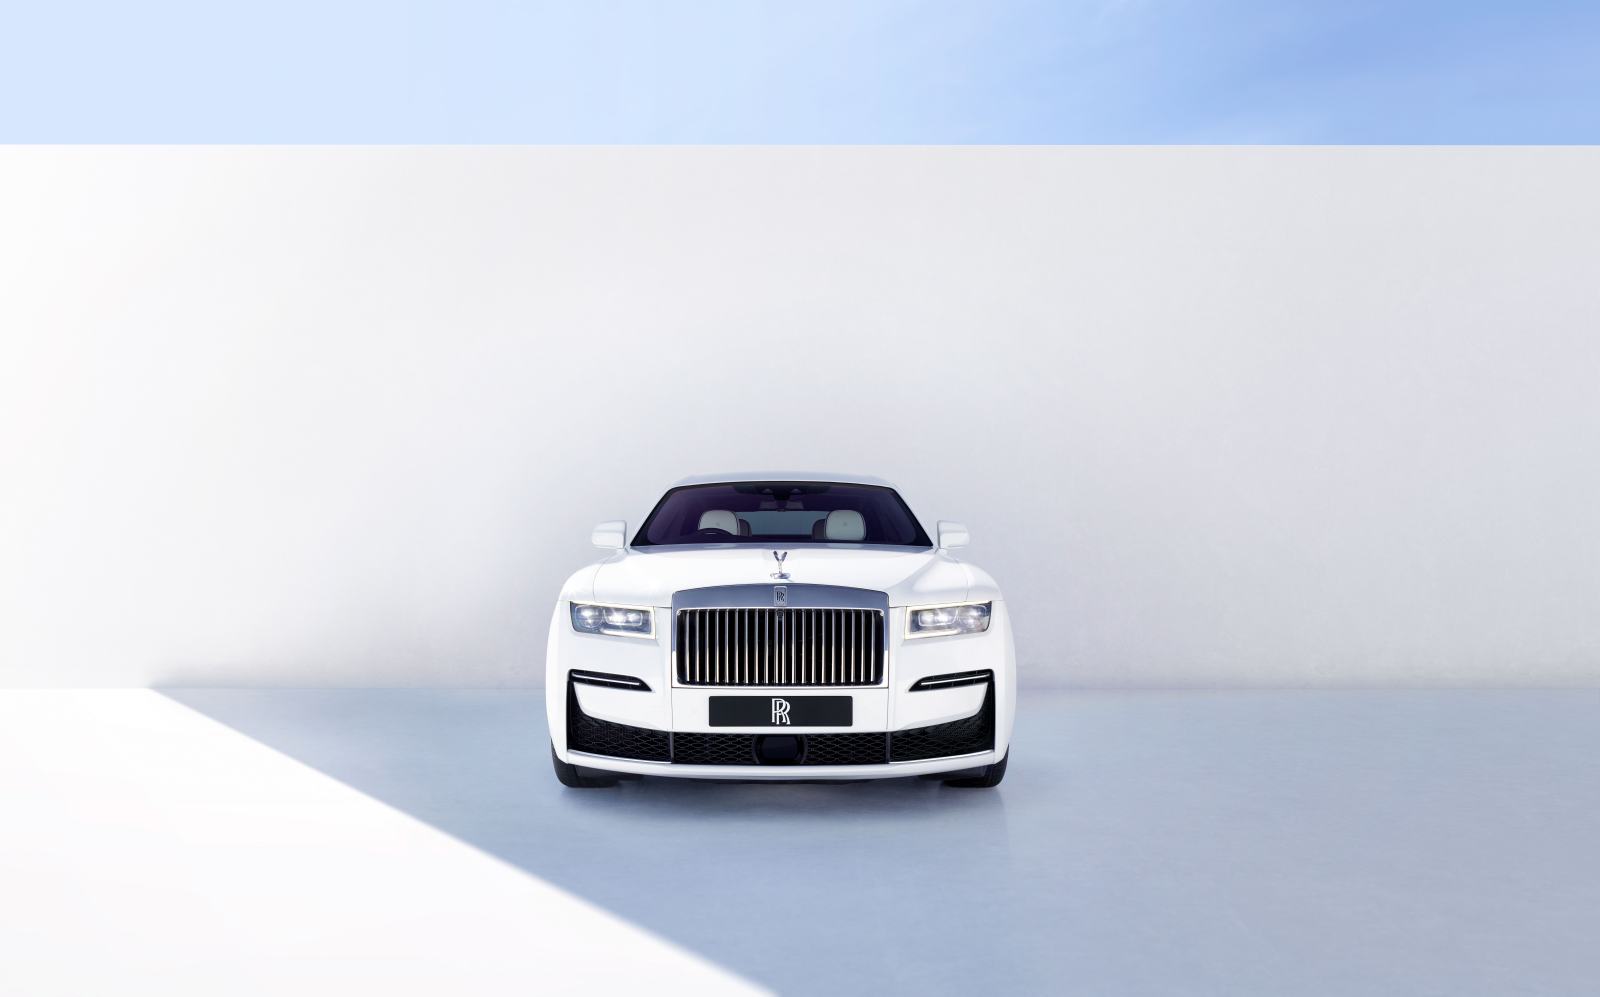 Rolls Royce built a silent isolation chamber in its Phantom luxury car